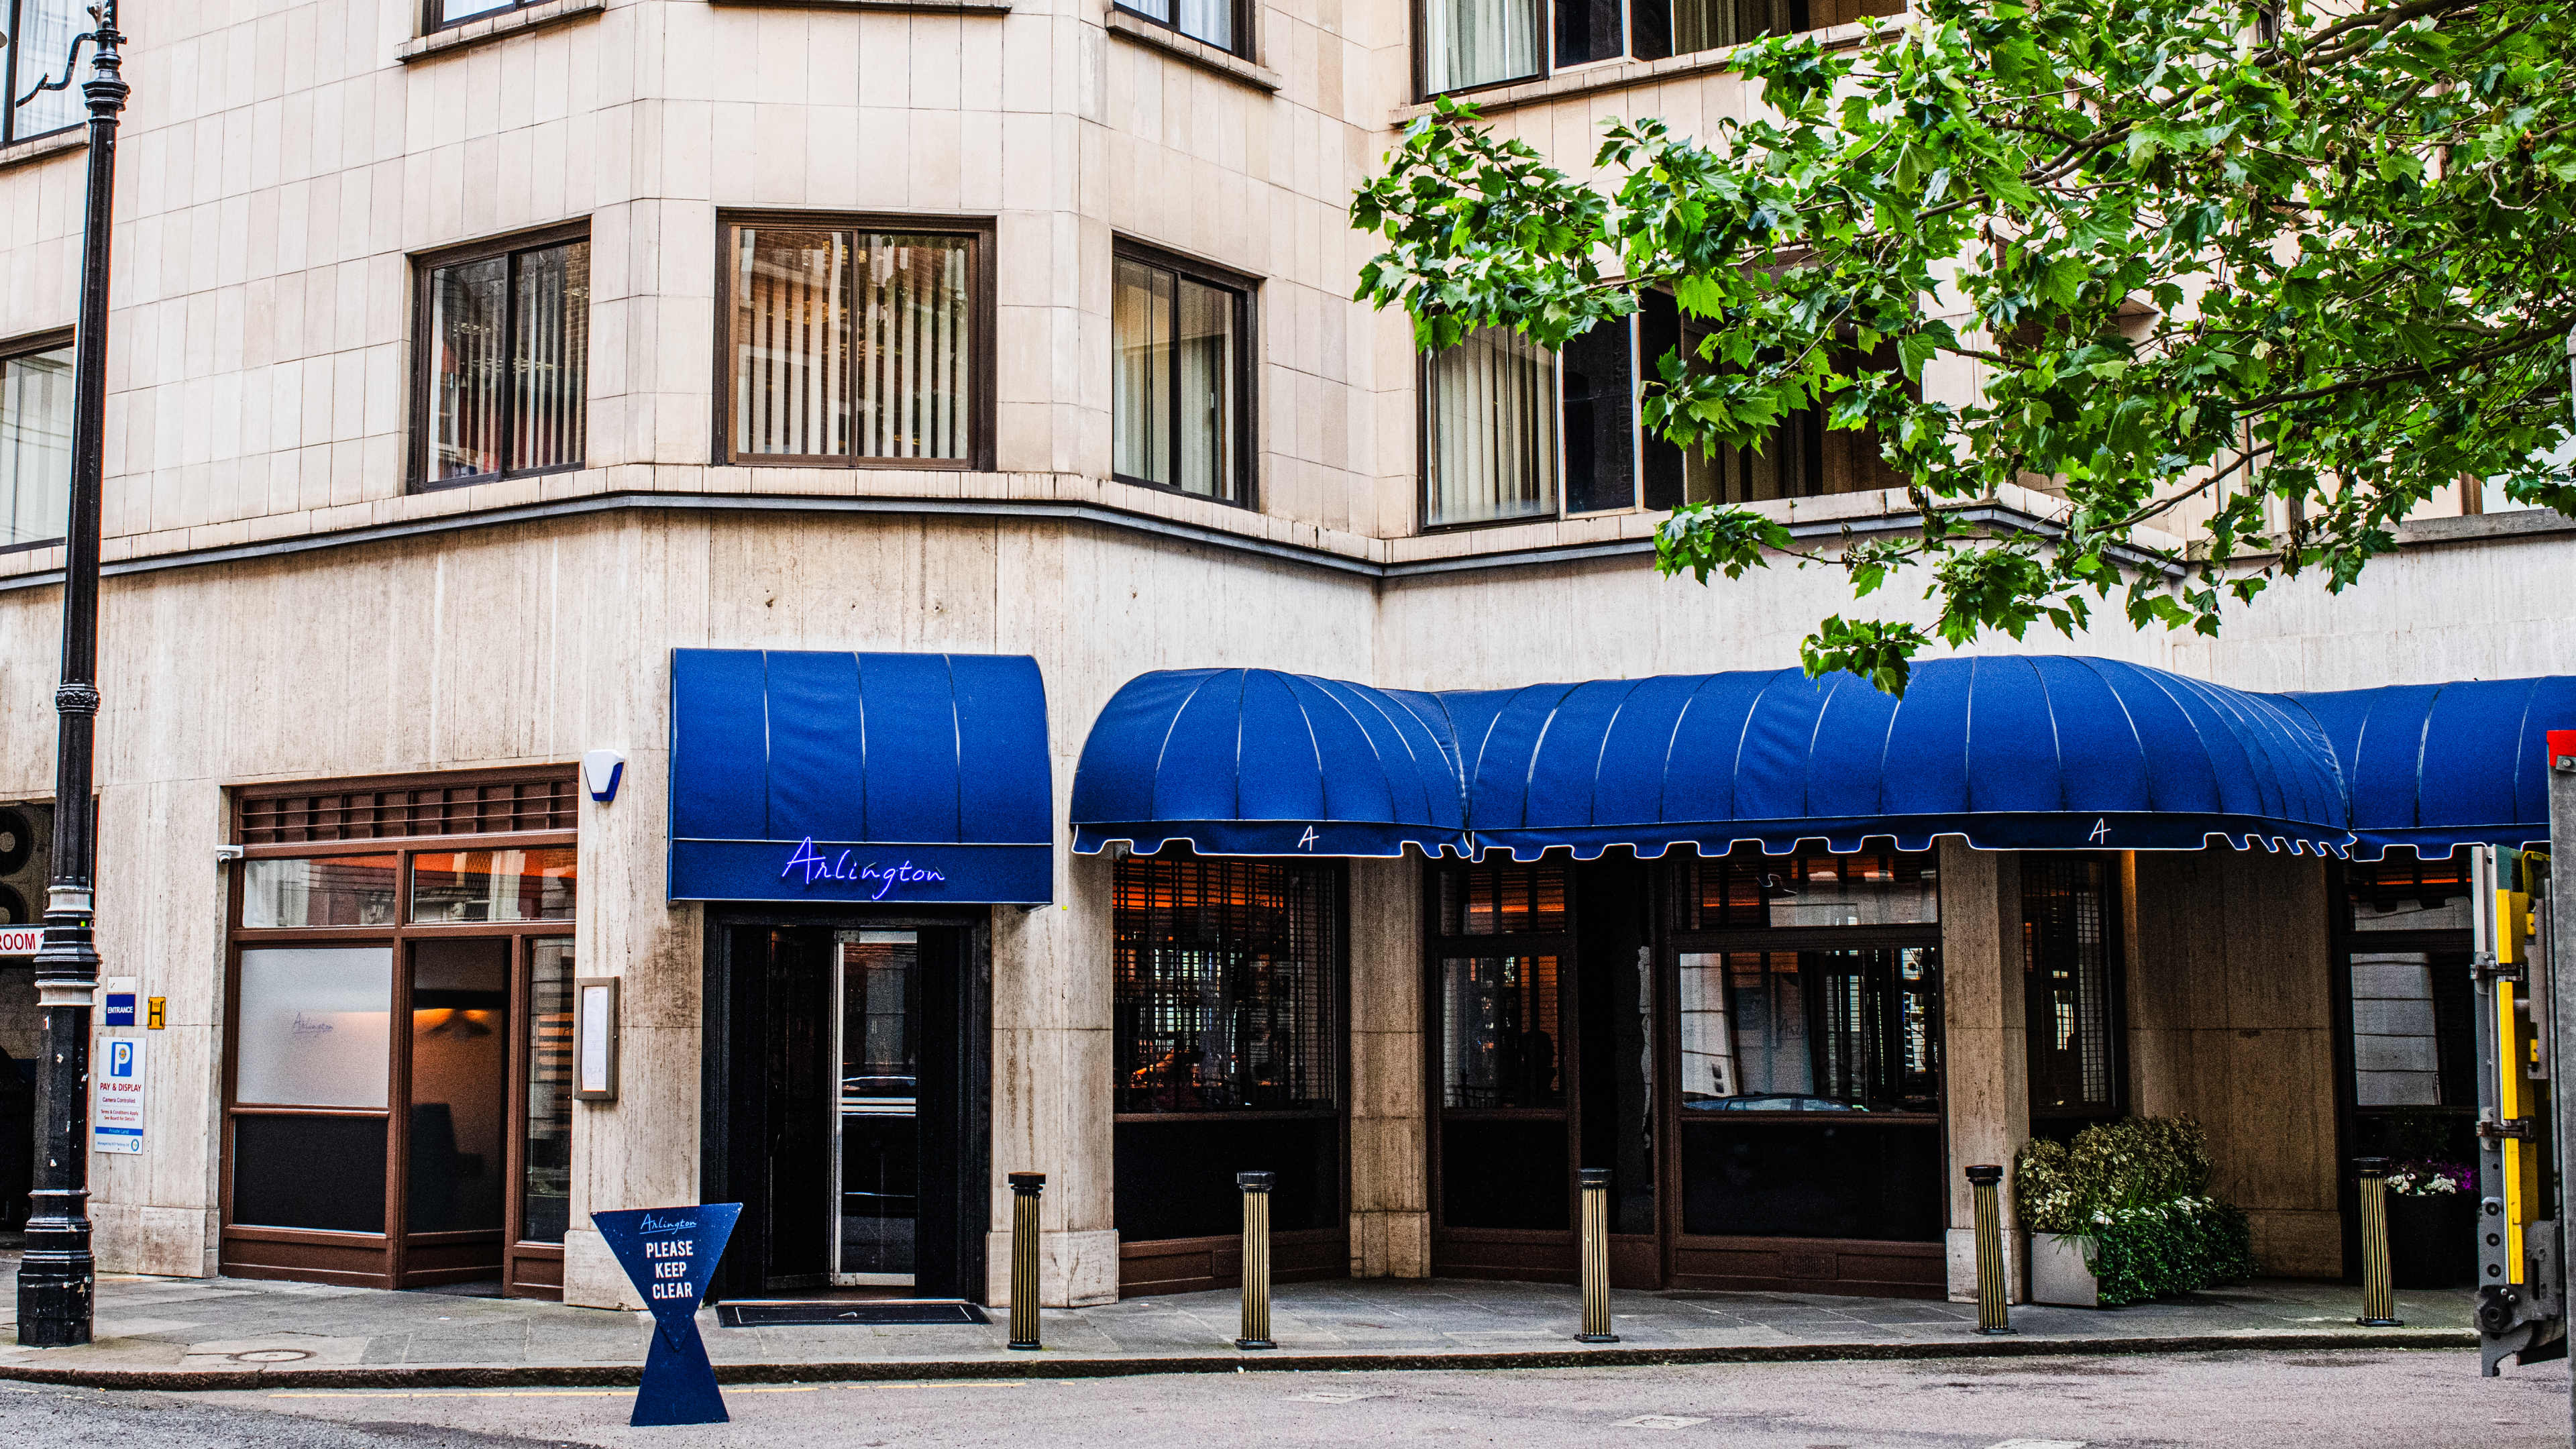 The exterior of Arlington with blue awnings.